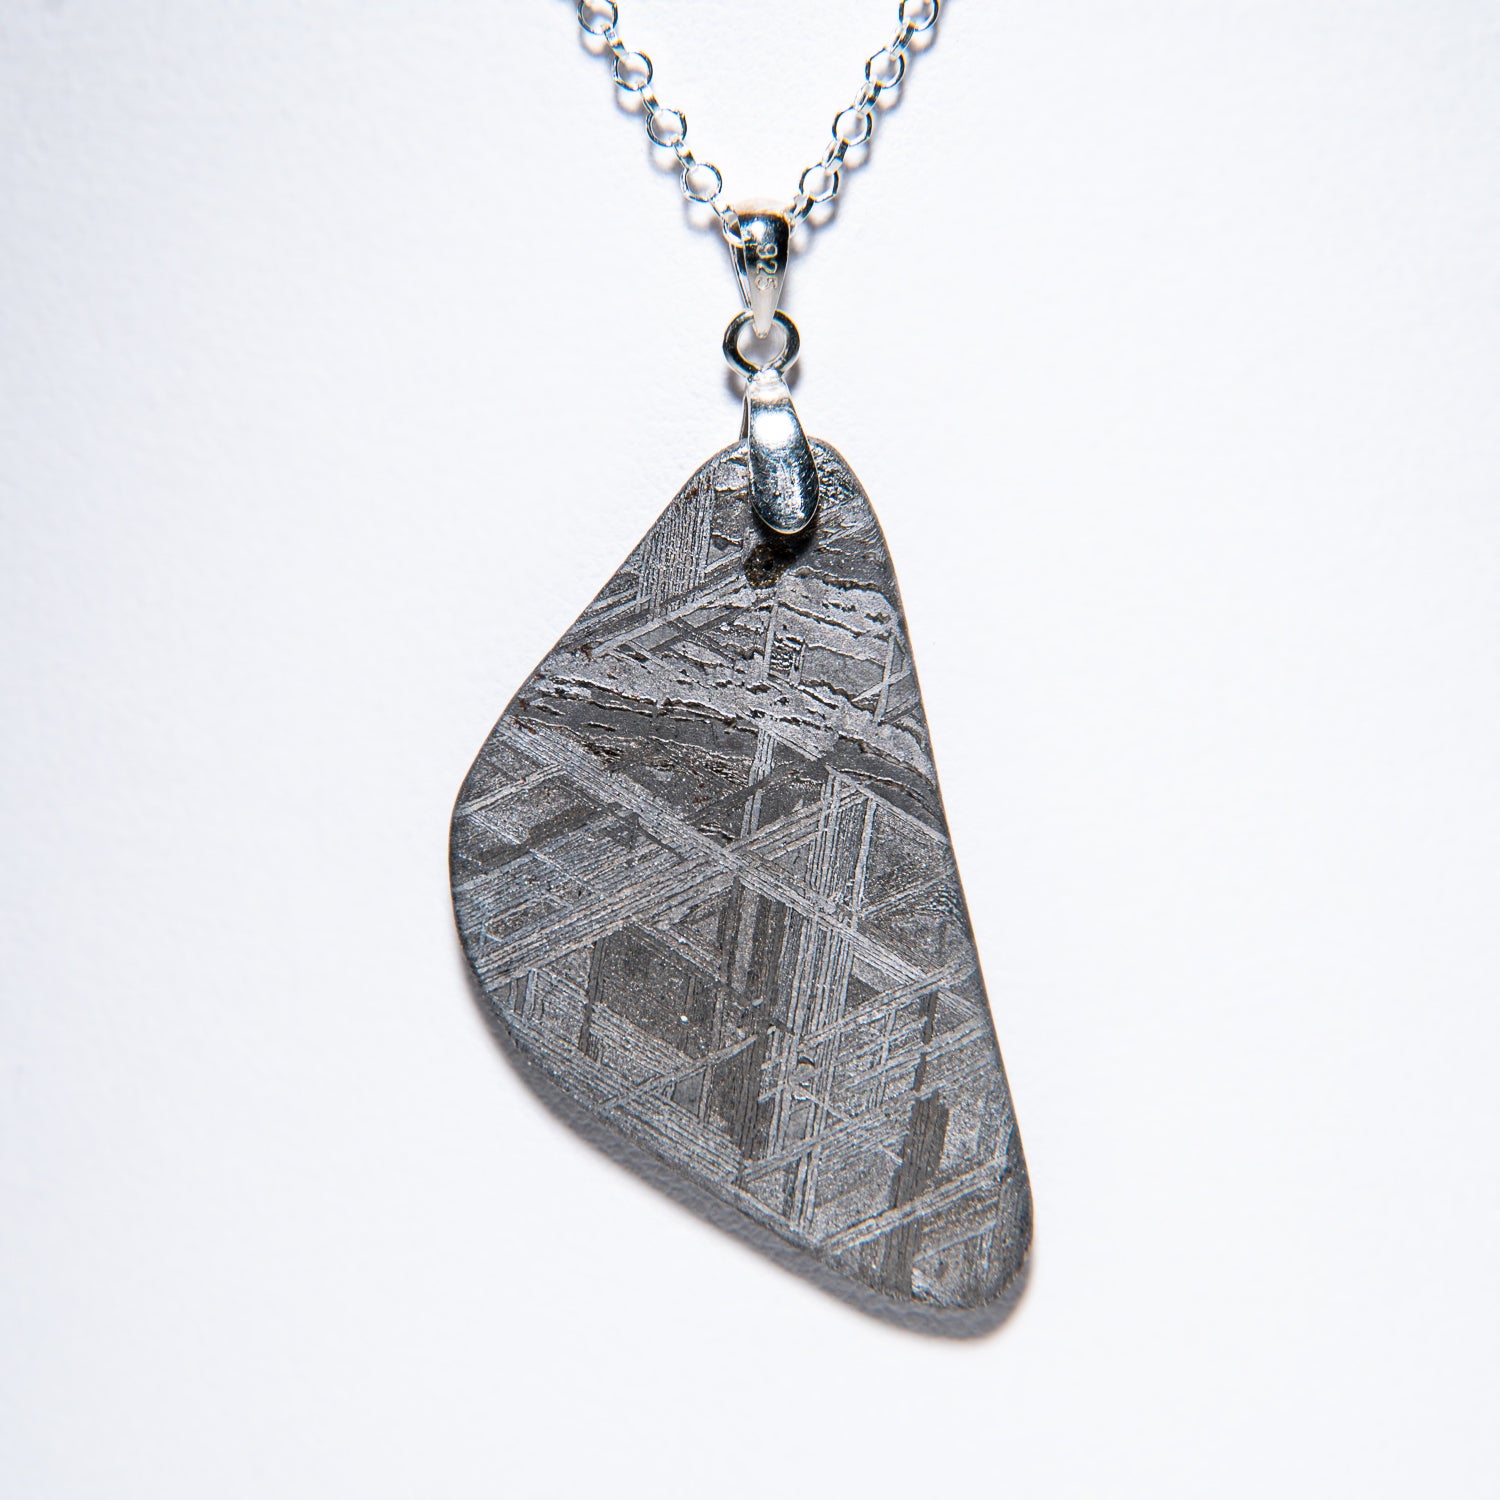 Polished Seymchan Meteorite pendant (8 grams) with 18" Sterling Silver Chain